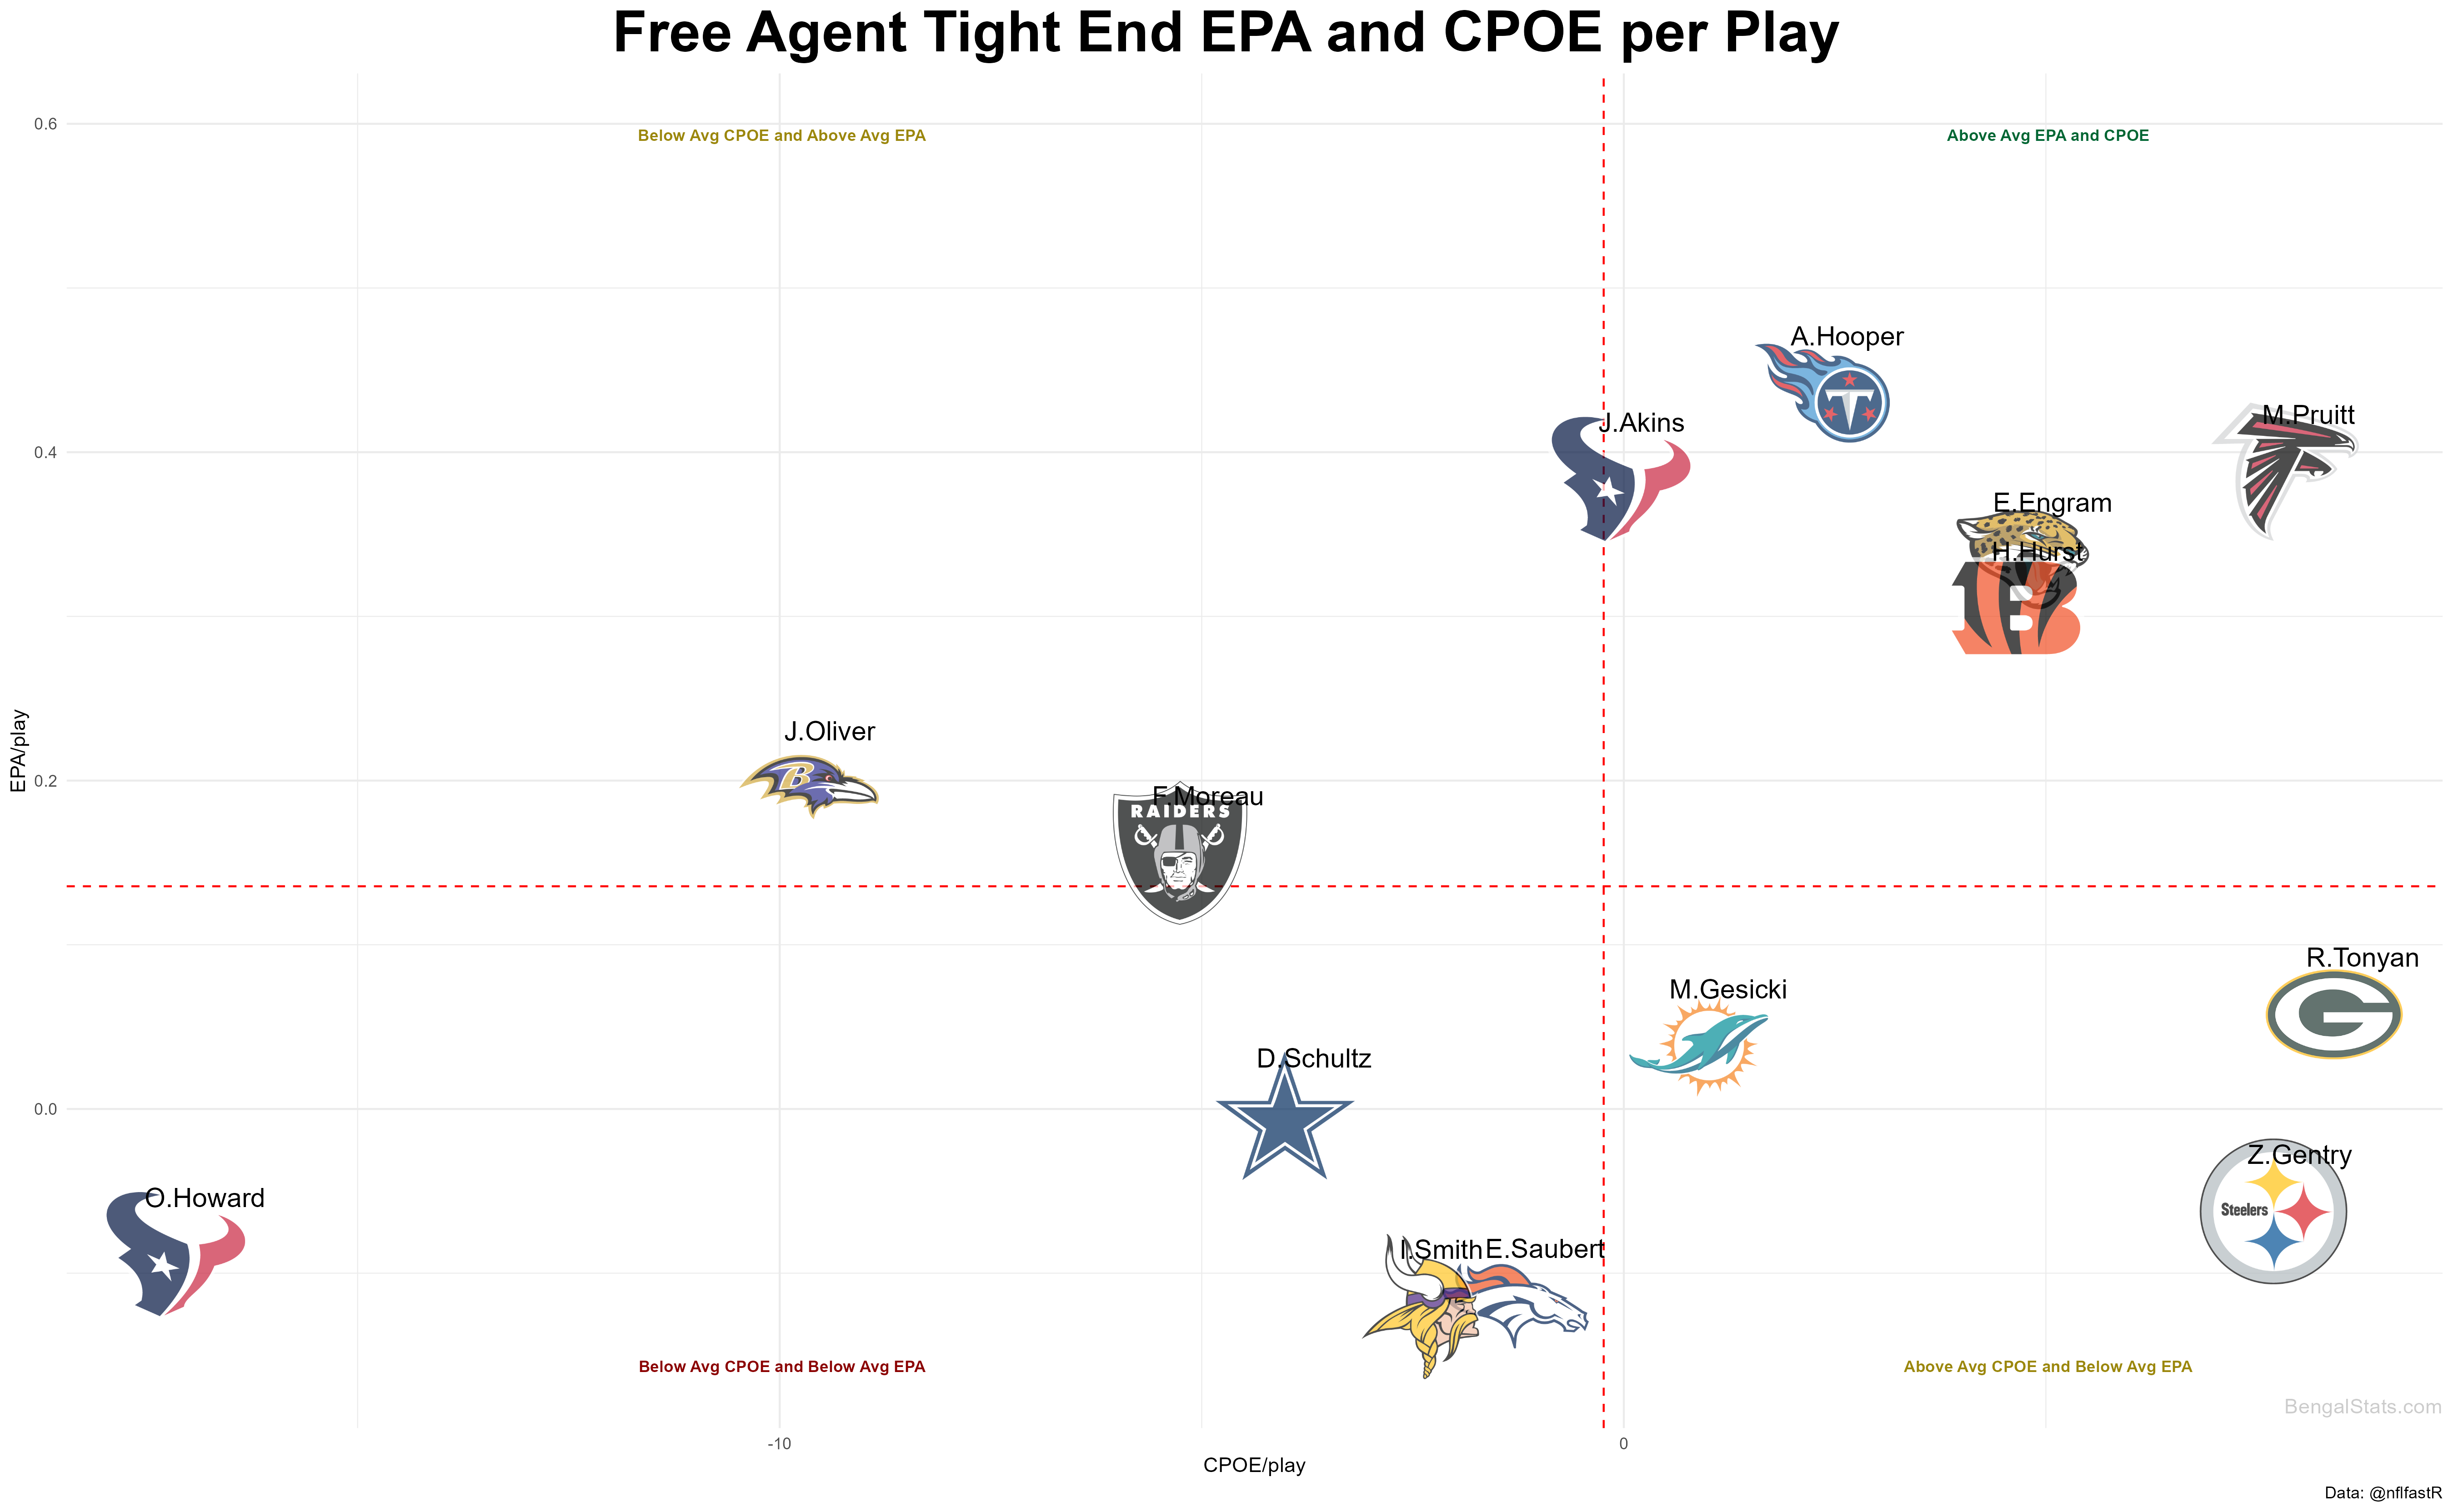 Free Agent Tight Ends